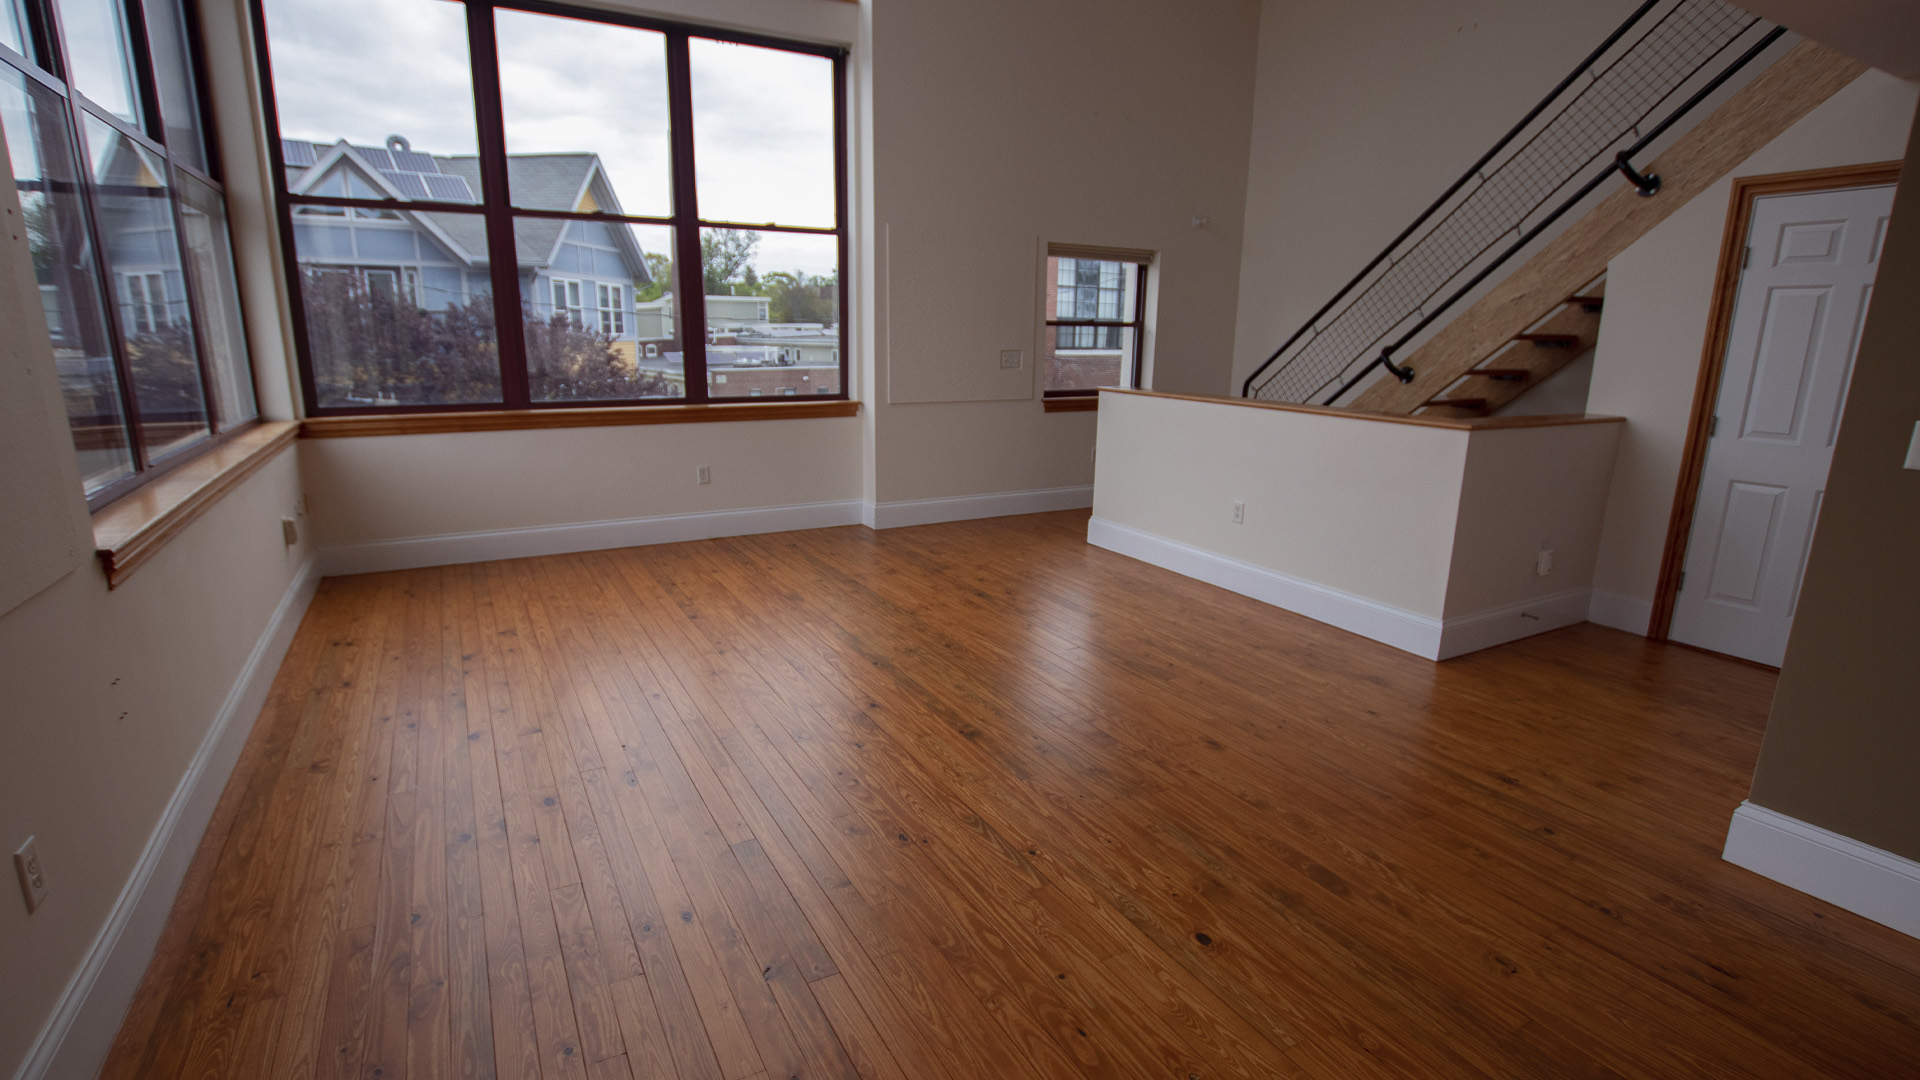 Weles Wood Floor Services in Jamaica Plain after